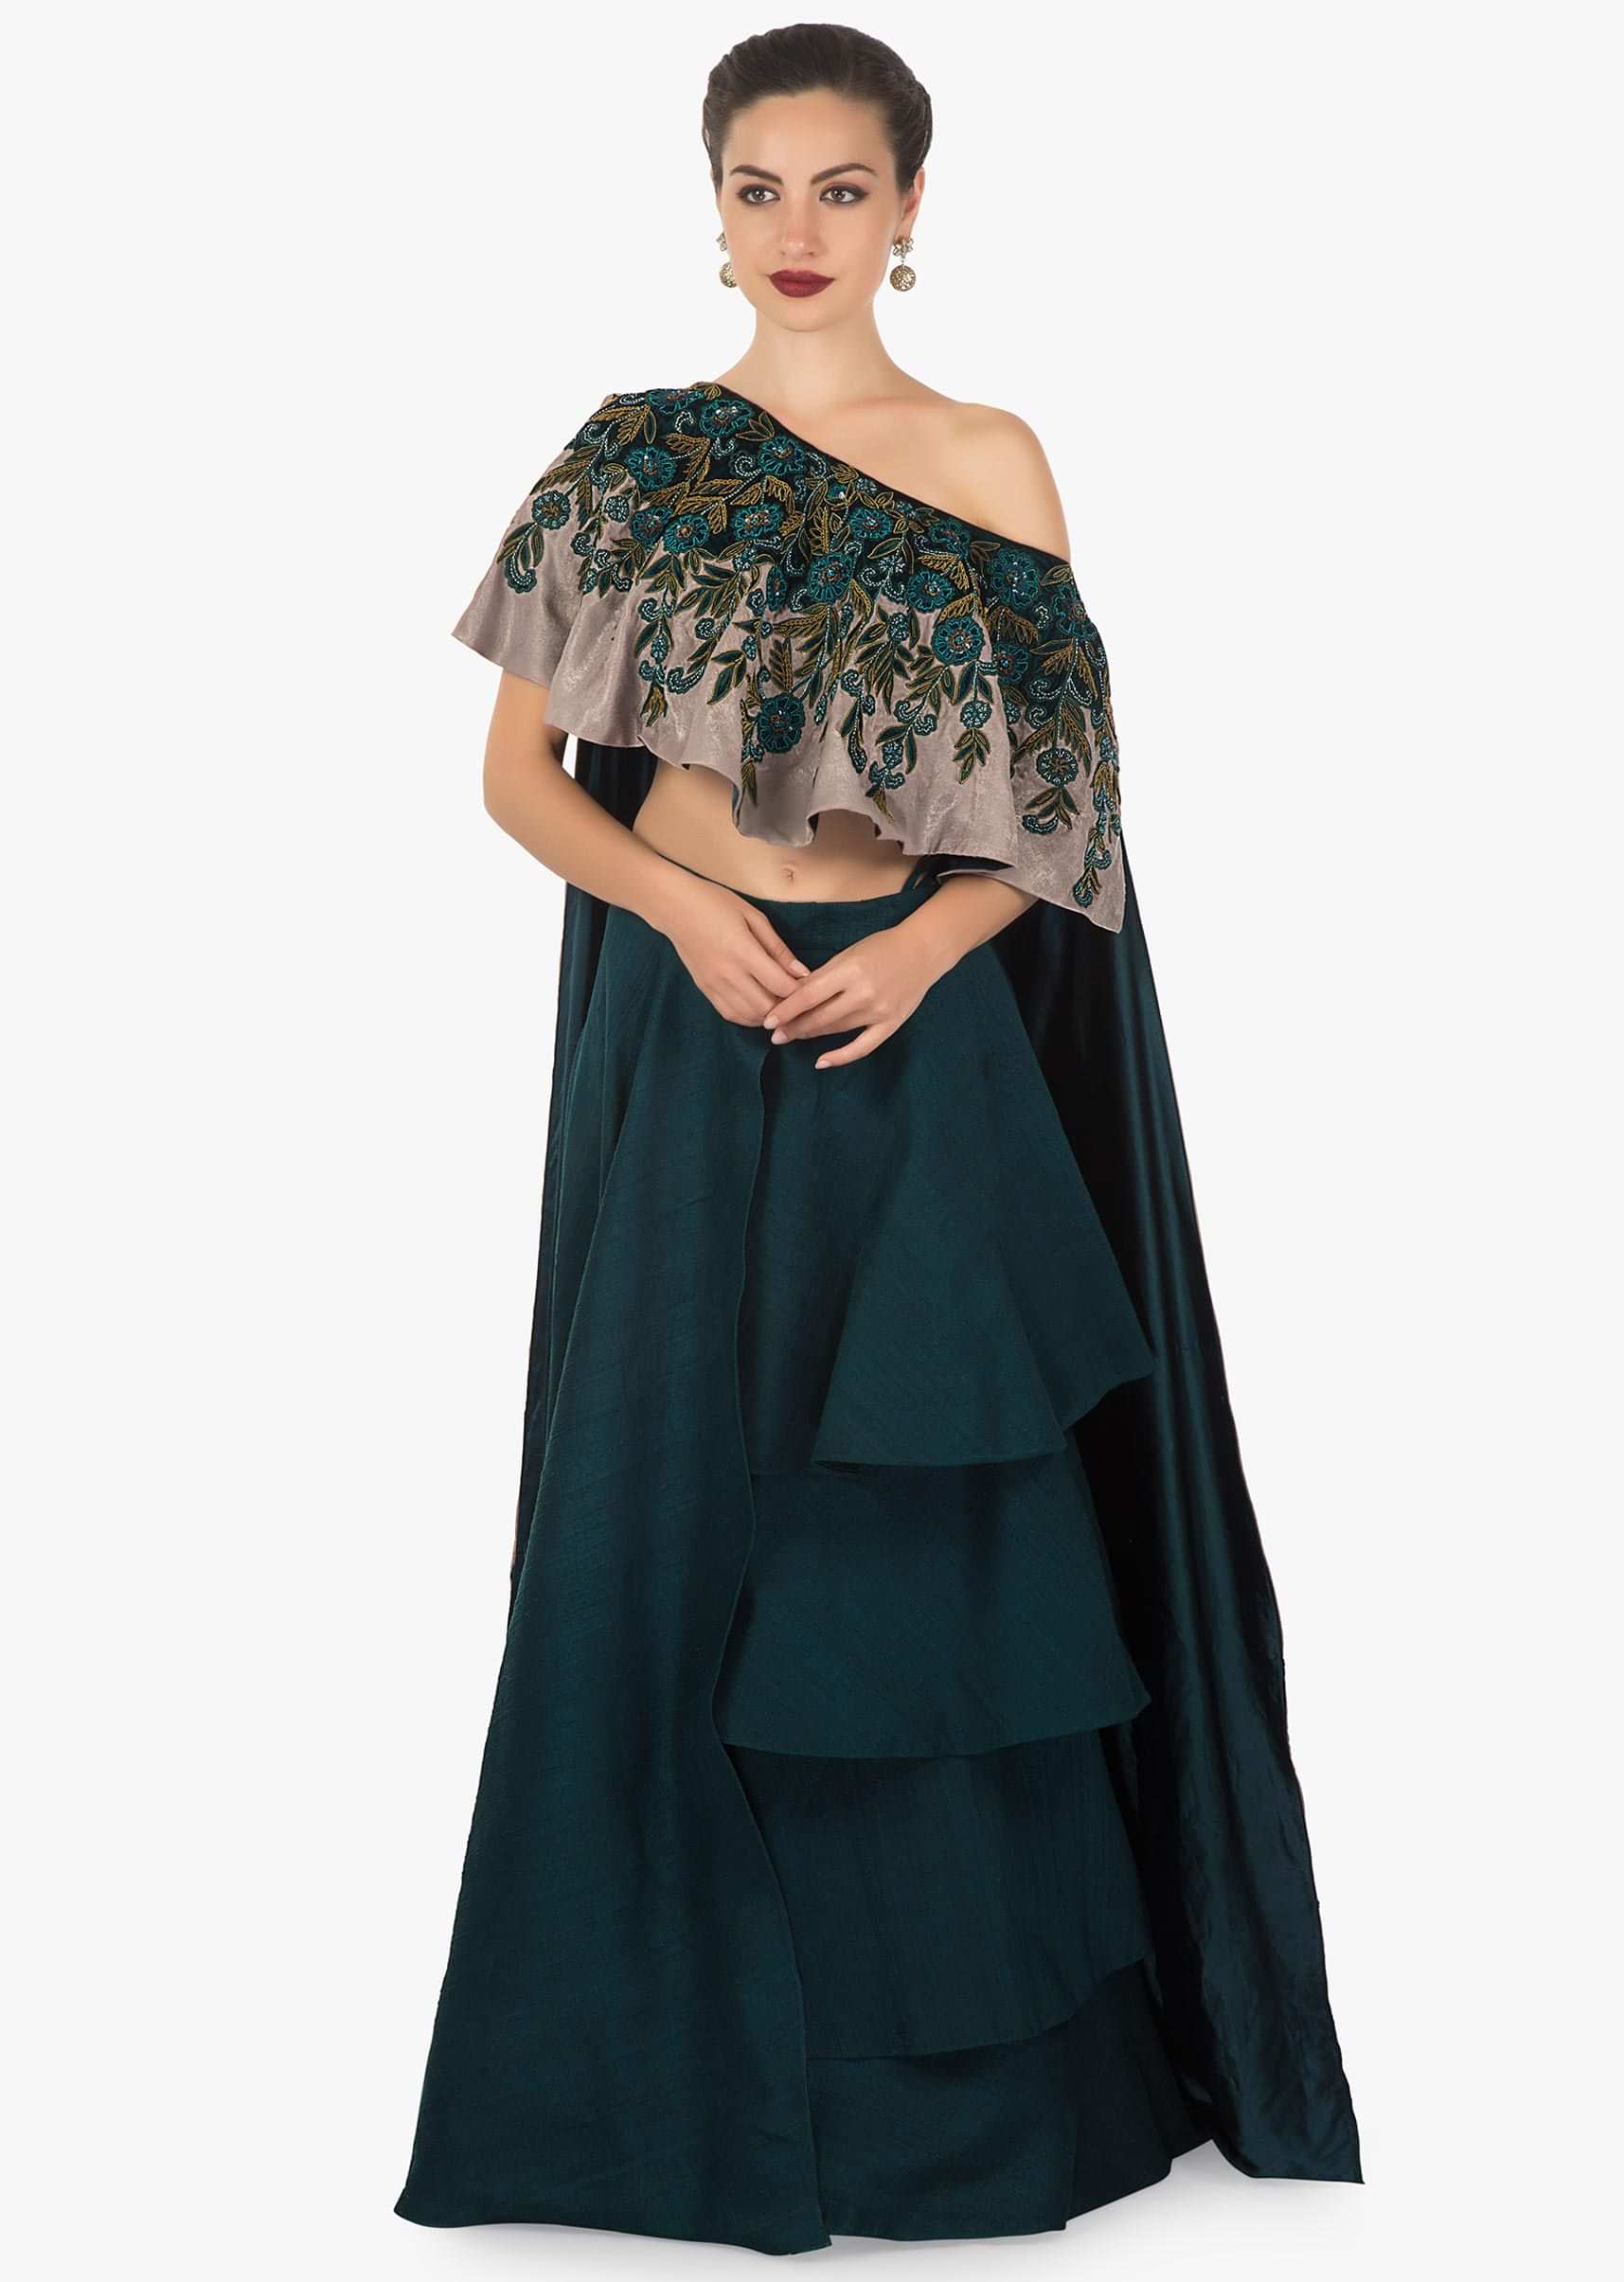 Teal green layered skirt matched with fancy cape blouse in velvet applique work